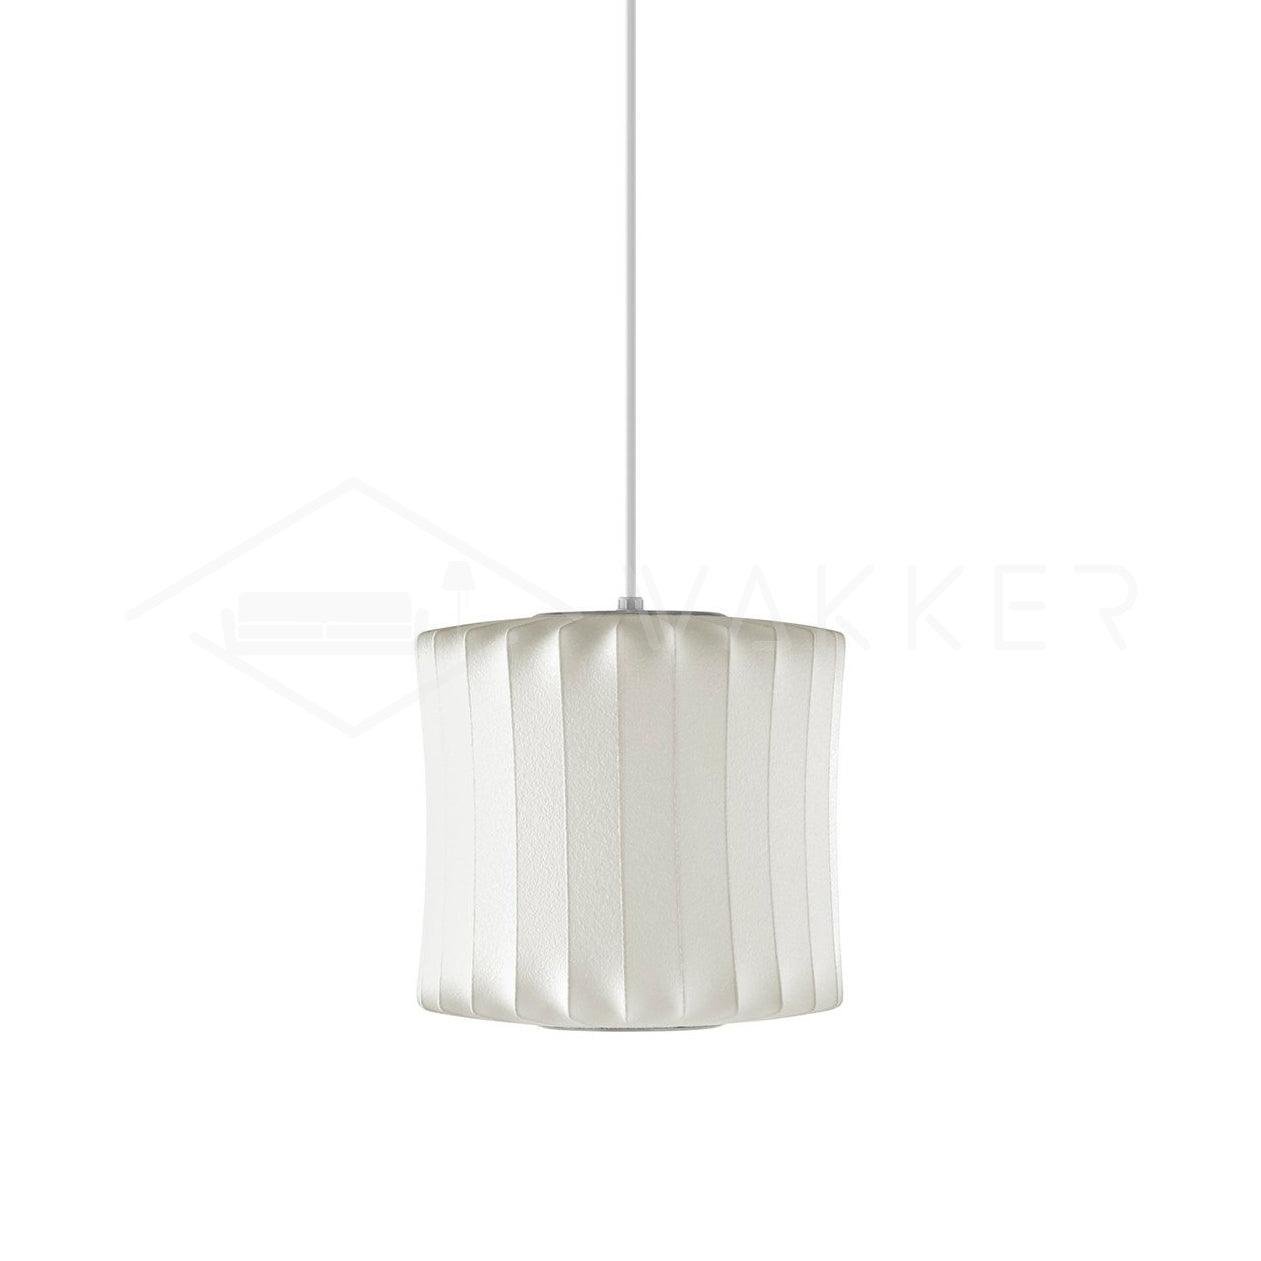 White Nelson Bubble Pendant Lamp Model G, with a diameter of 13.7" and a height of 12.6" (35cm x 32cm).